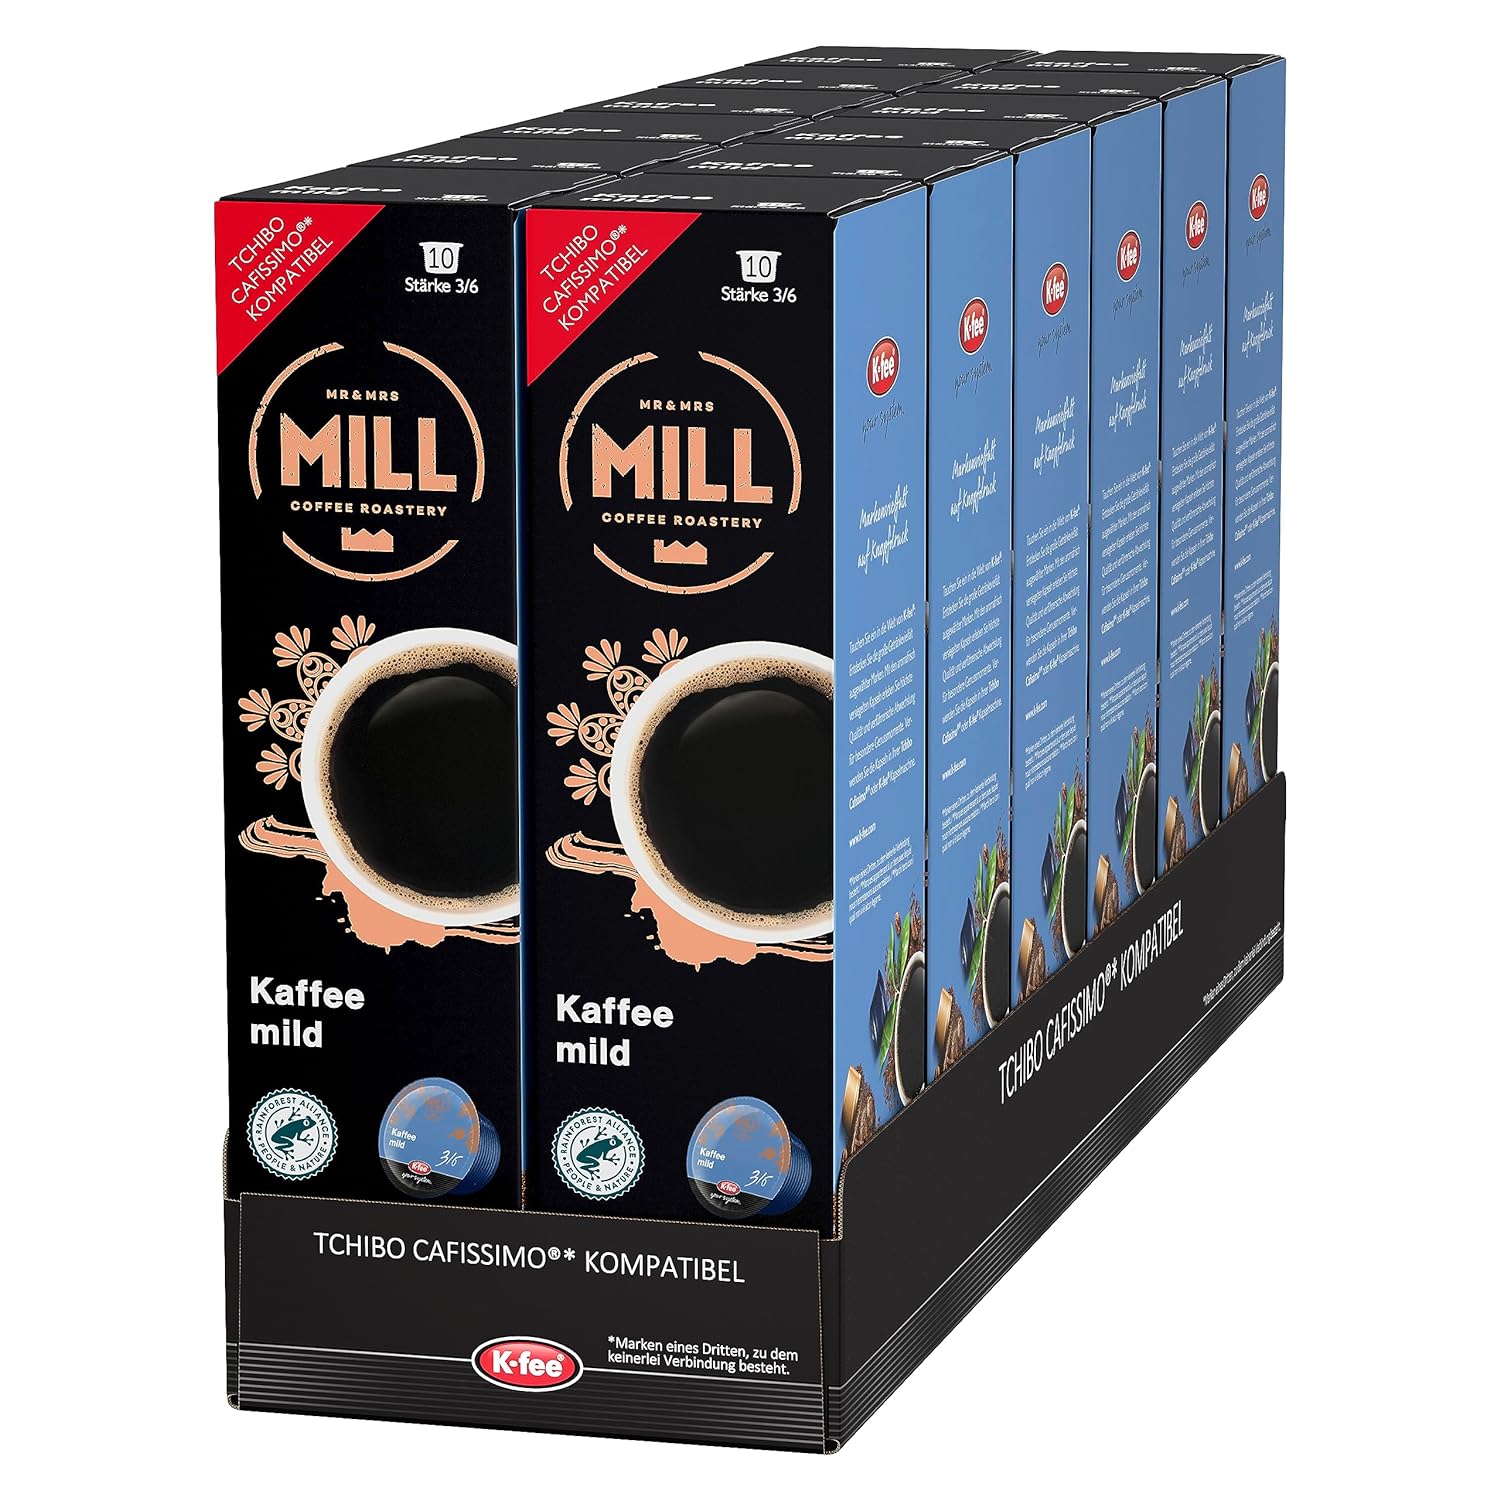 Mr & Mrs Mill Coffee Capsules Coffee Mild, Filter Coffee, Strength 3/6, Compatible with K-fee & Tchibo Cafissimo*, UTZ Certified, 120 Capsules (12 x 10)